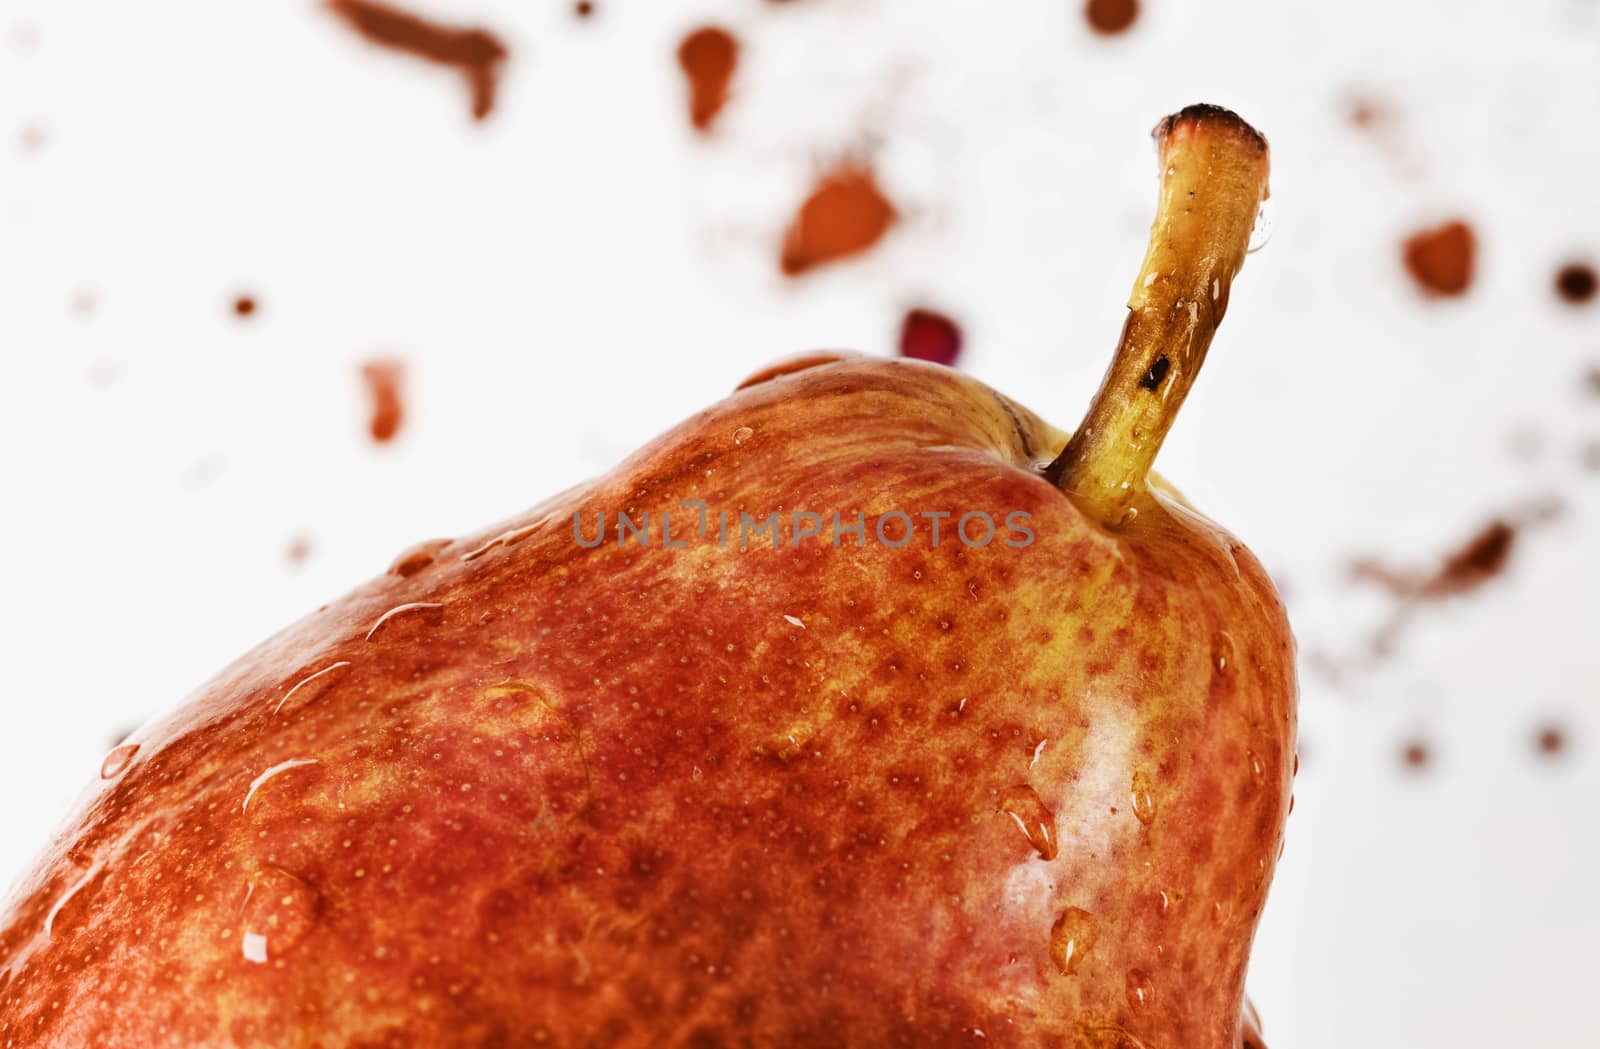 Beautiful orange pear on white background ,unpeeled fruit with water drops